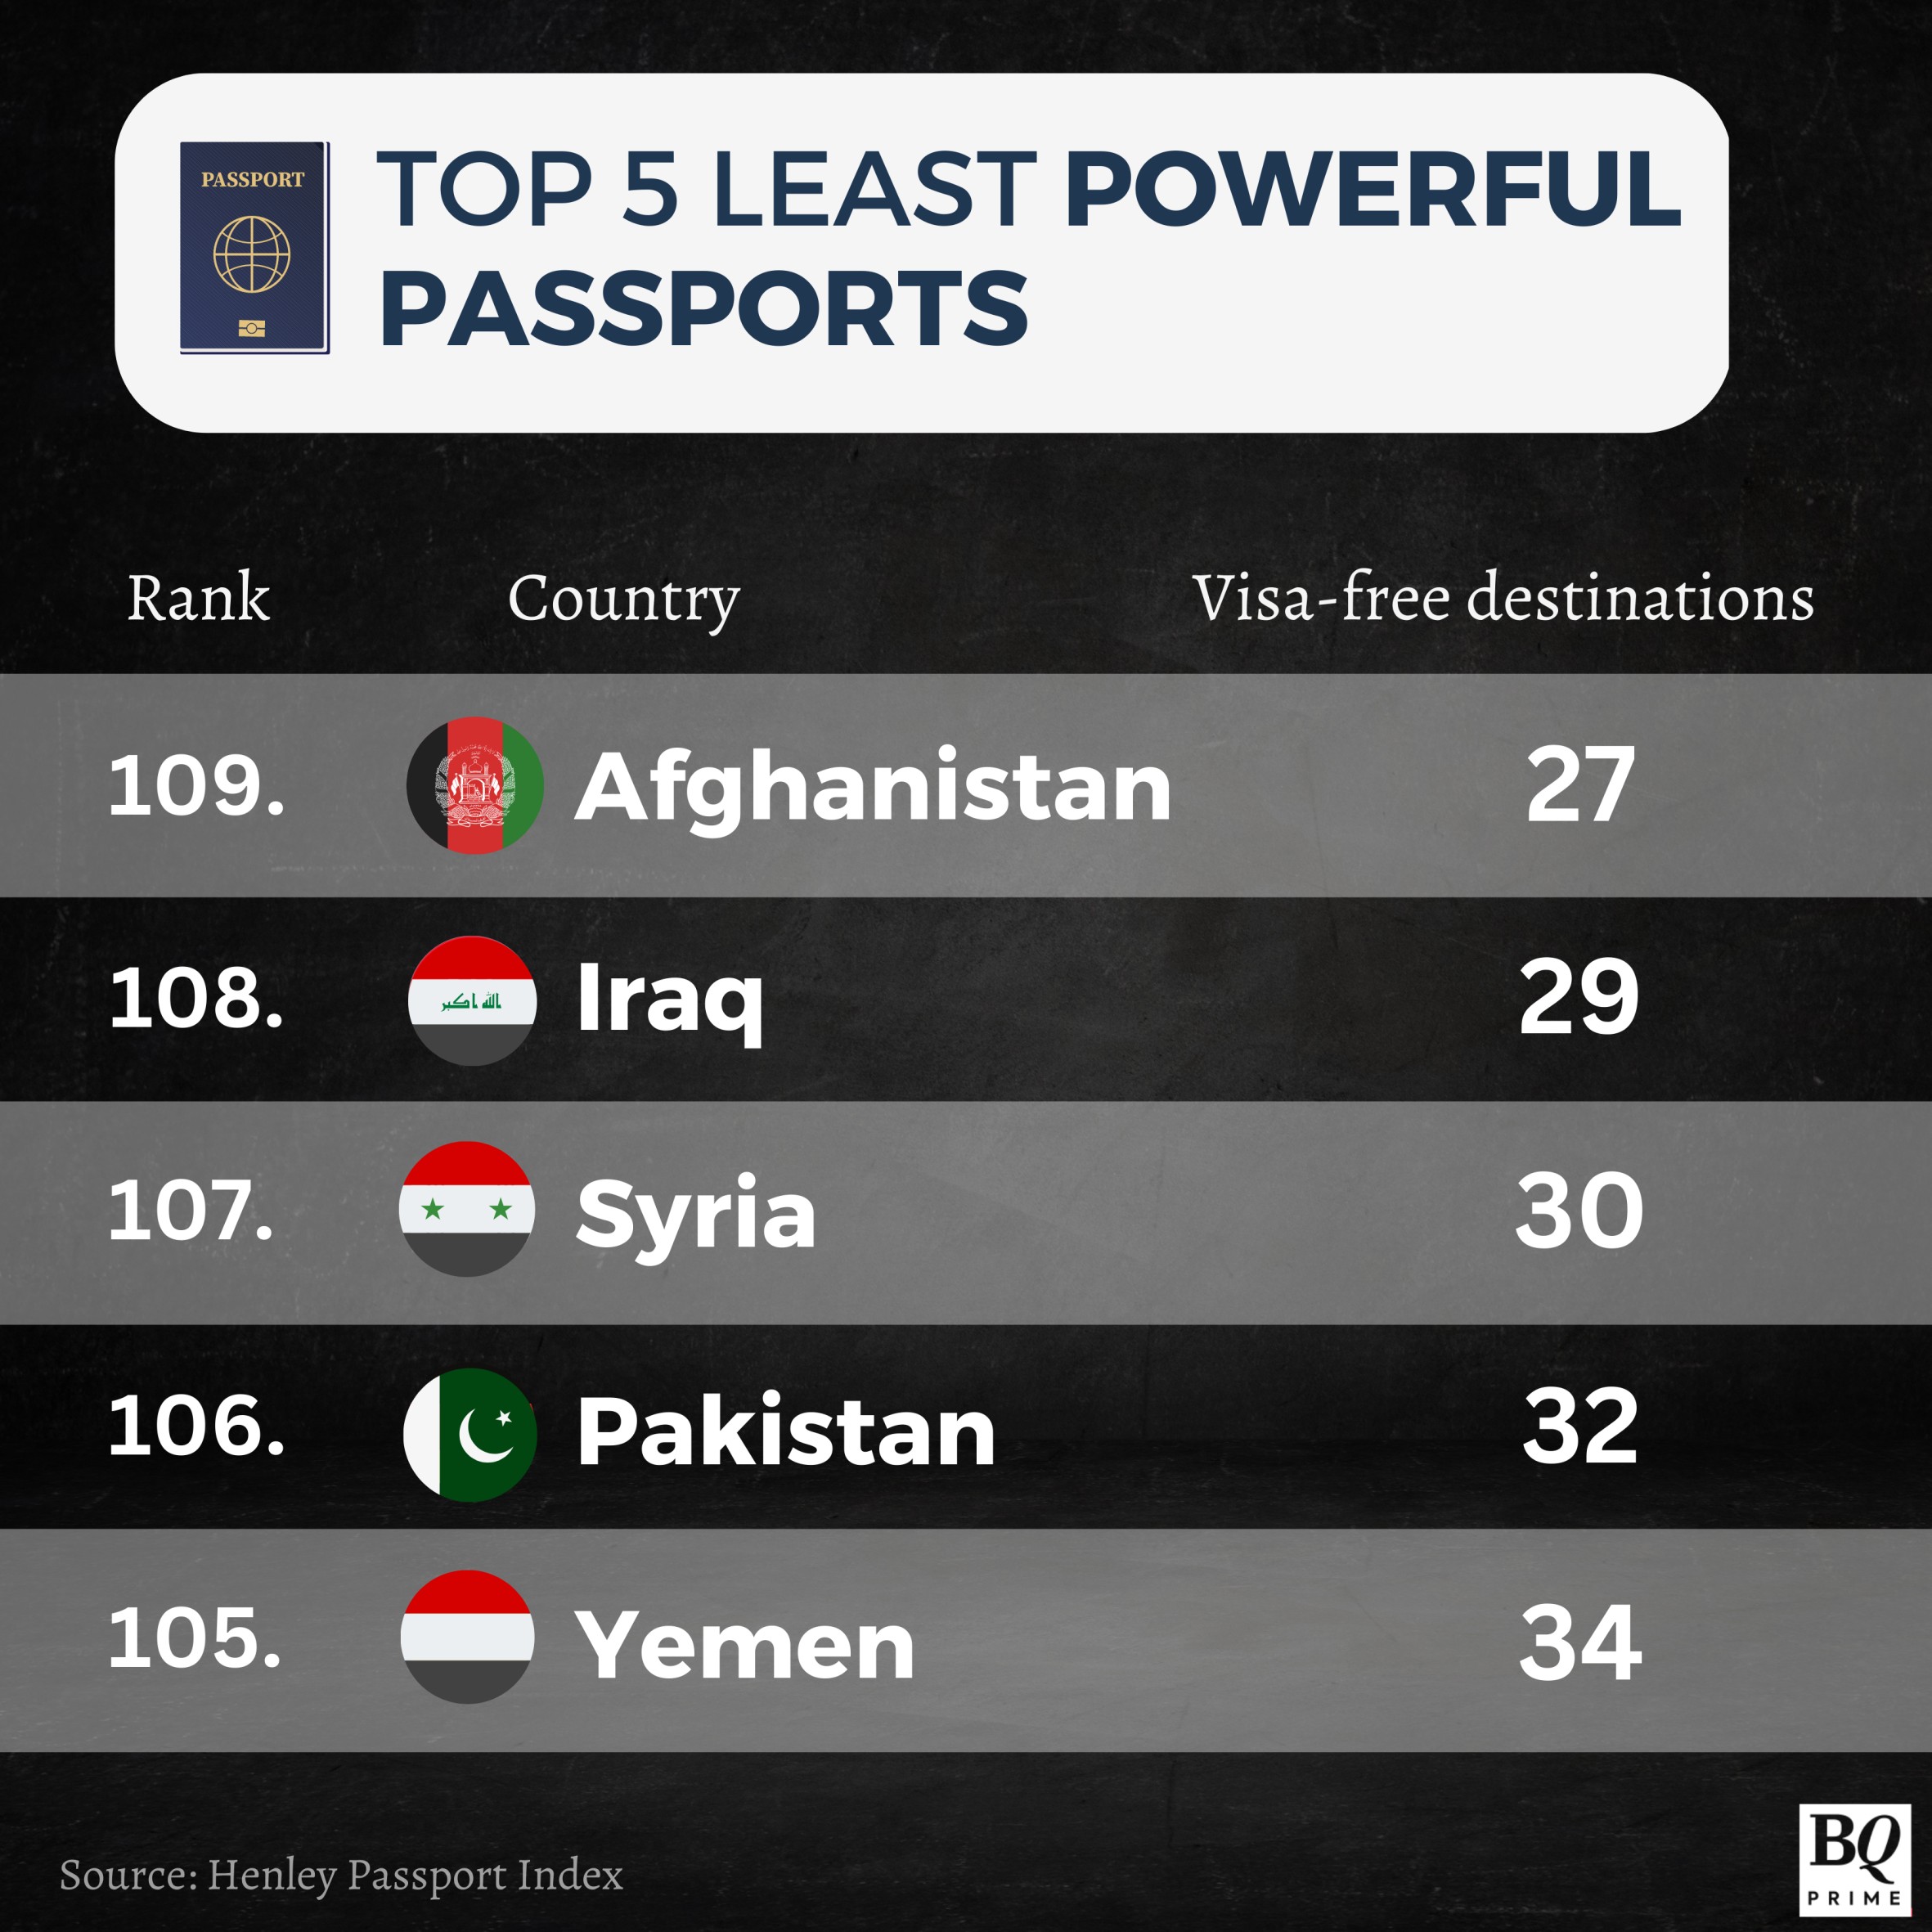 The World's Strongest Passports in 2023 